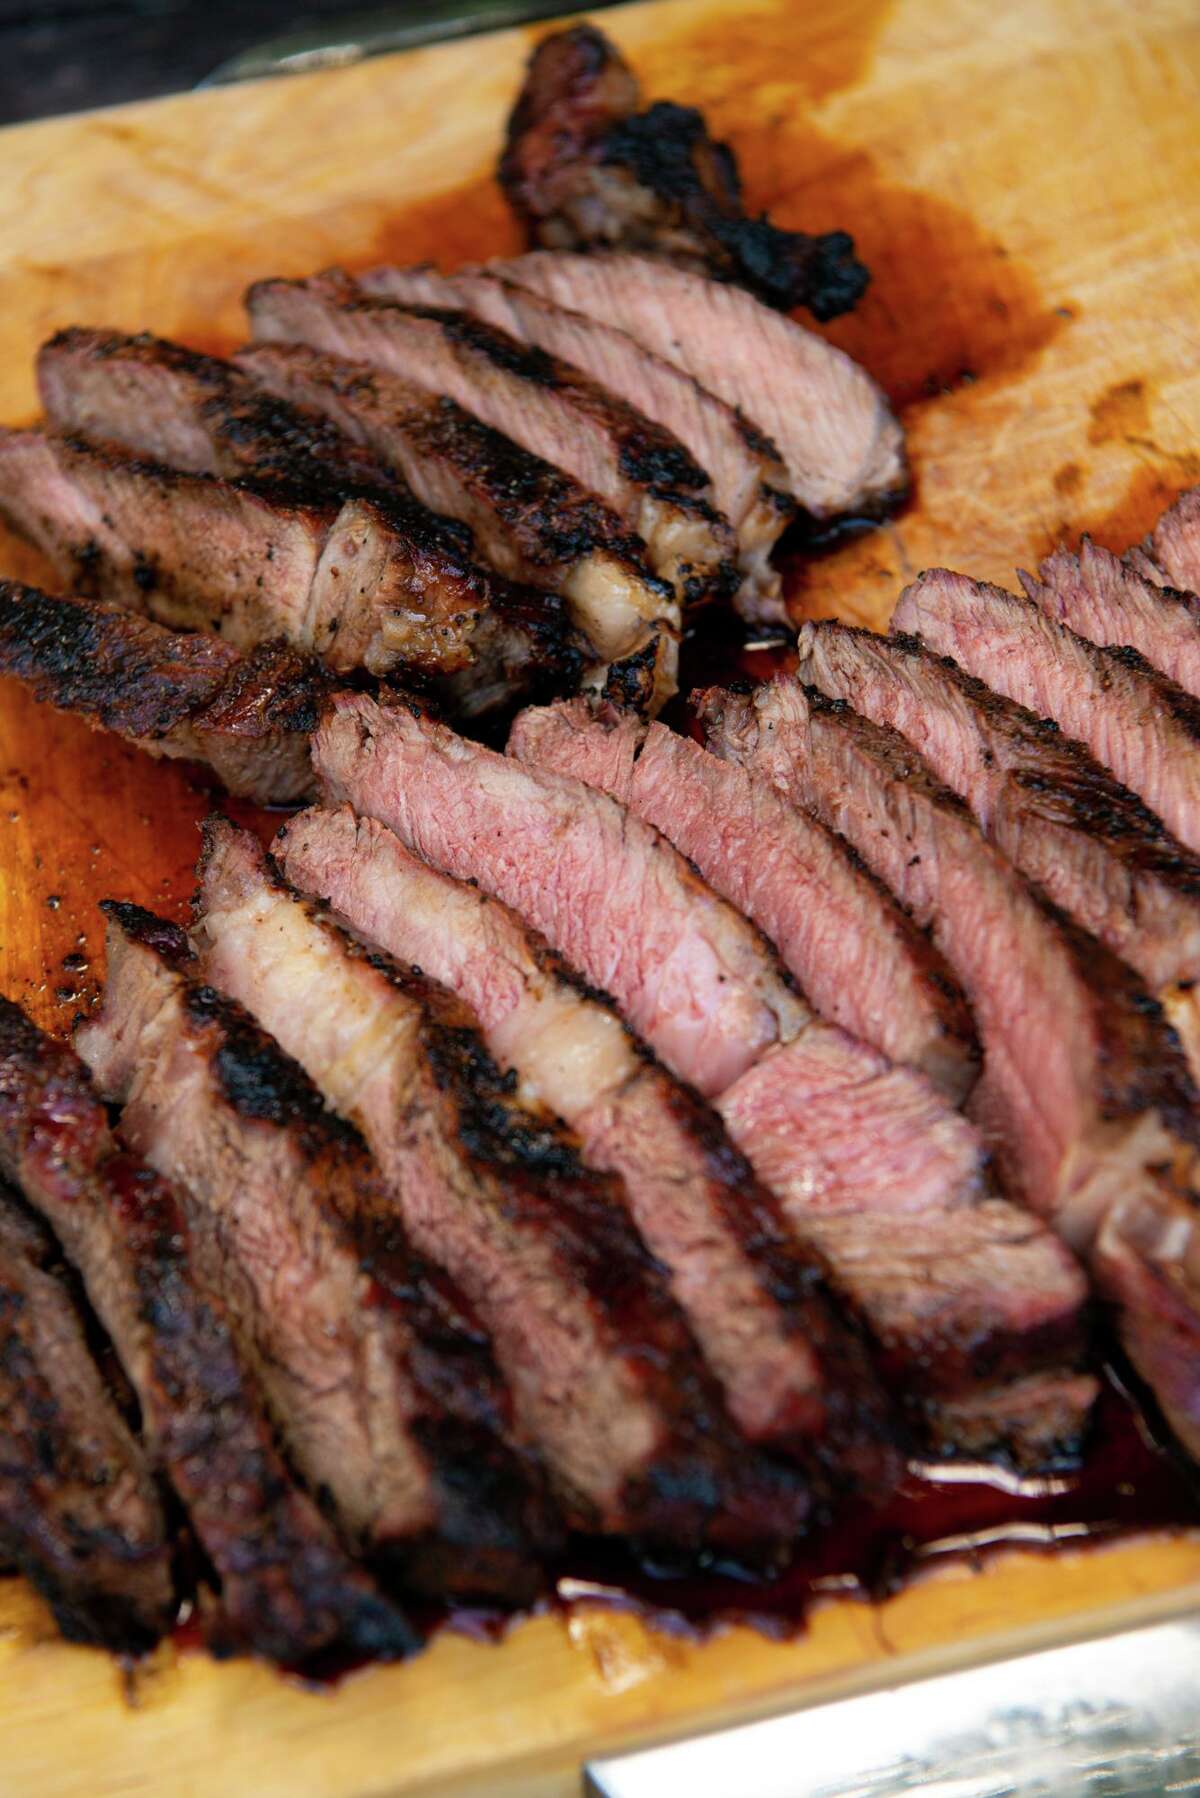 Rib-eye steaks of varying thickness were grilled and sliced in Chuck's Food Shack.